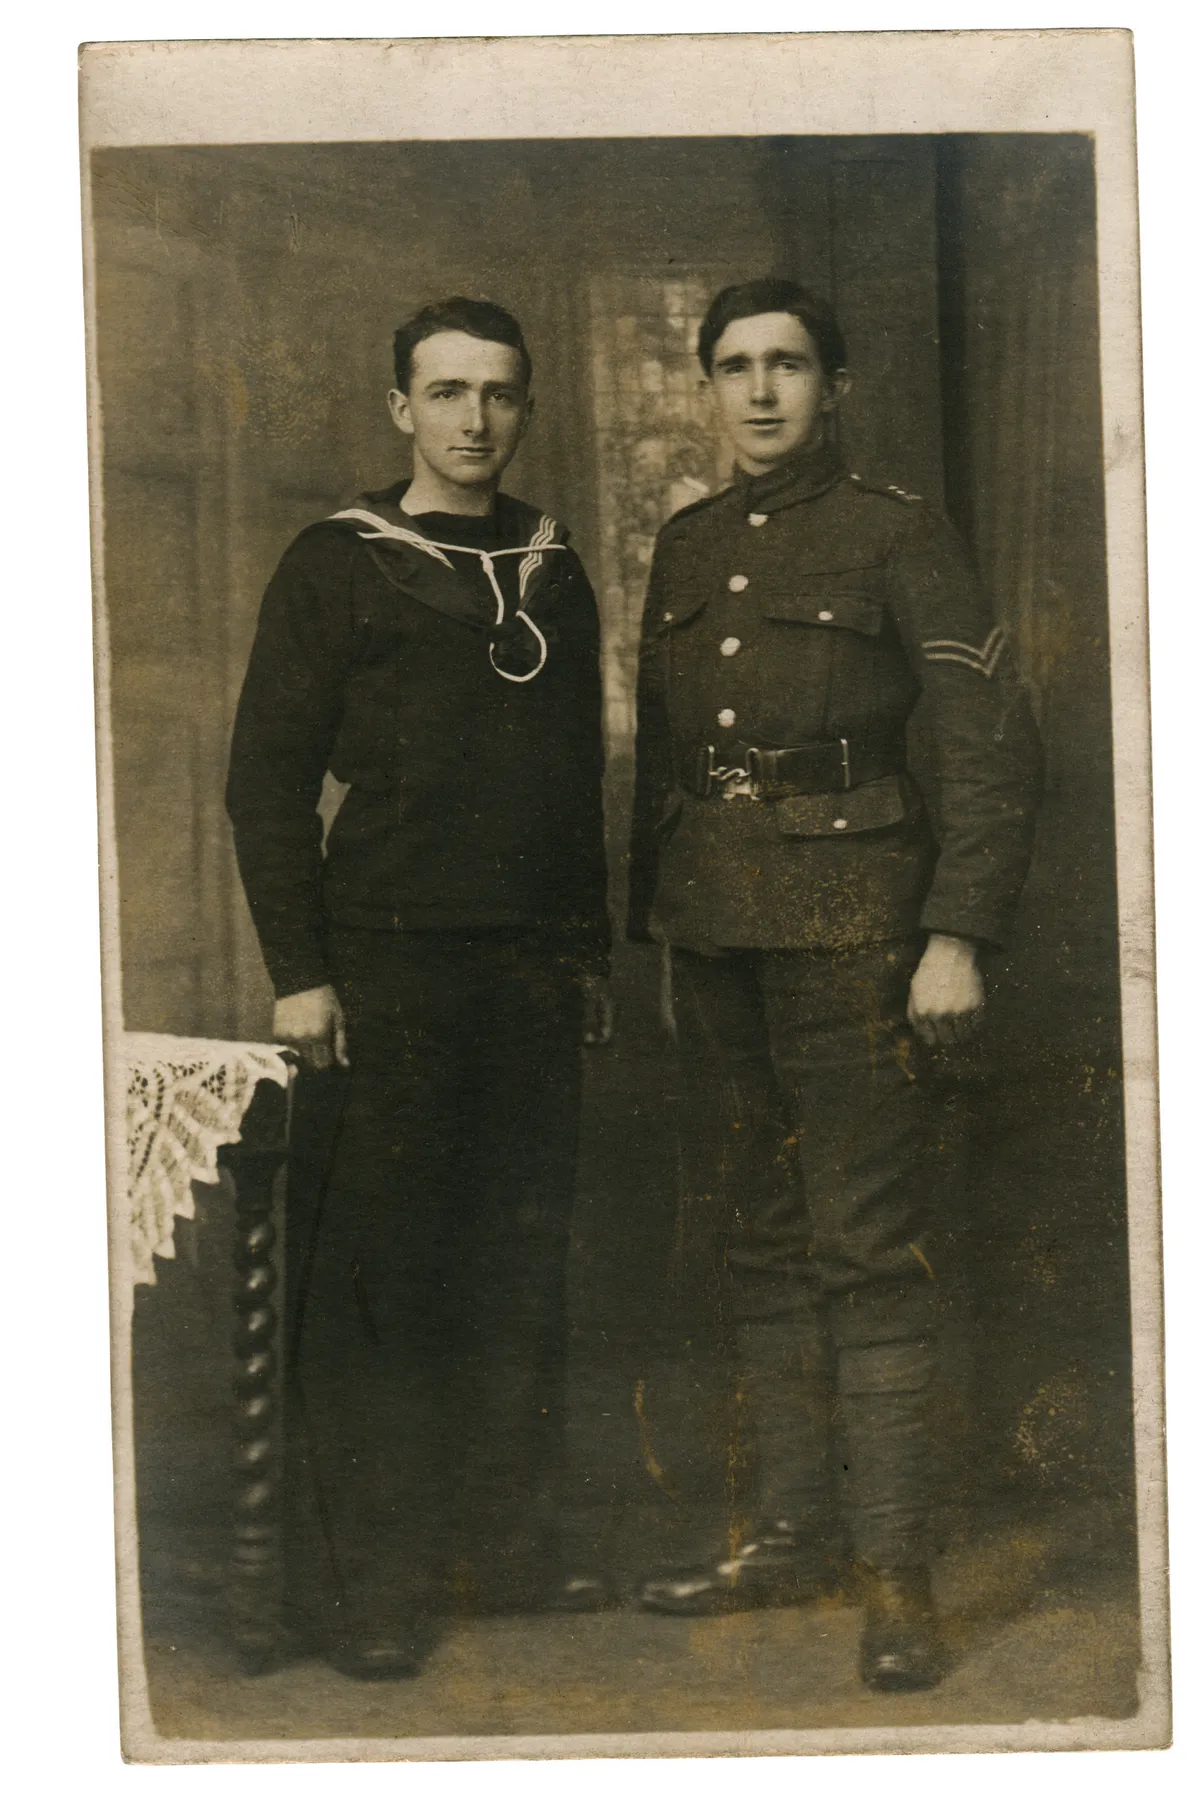 A black and white photograph of two men, one in a naval uniform and one in an army uniform